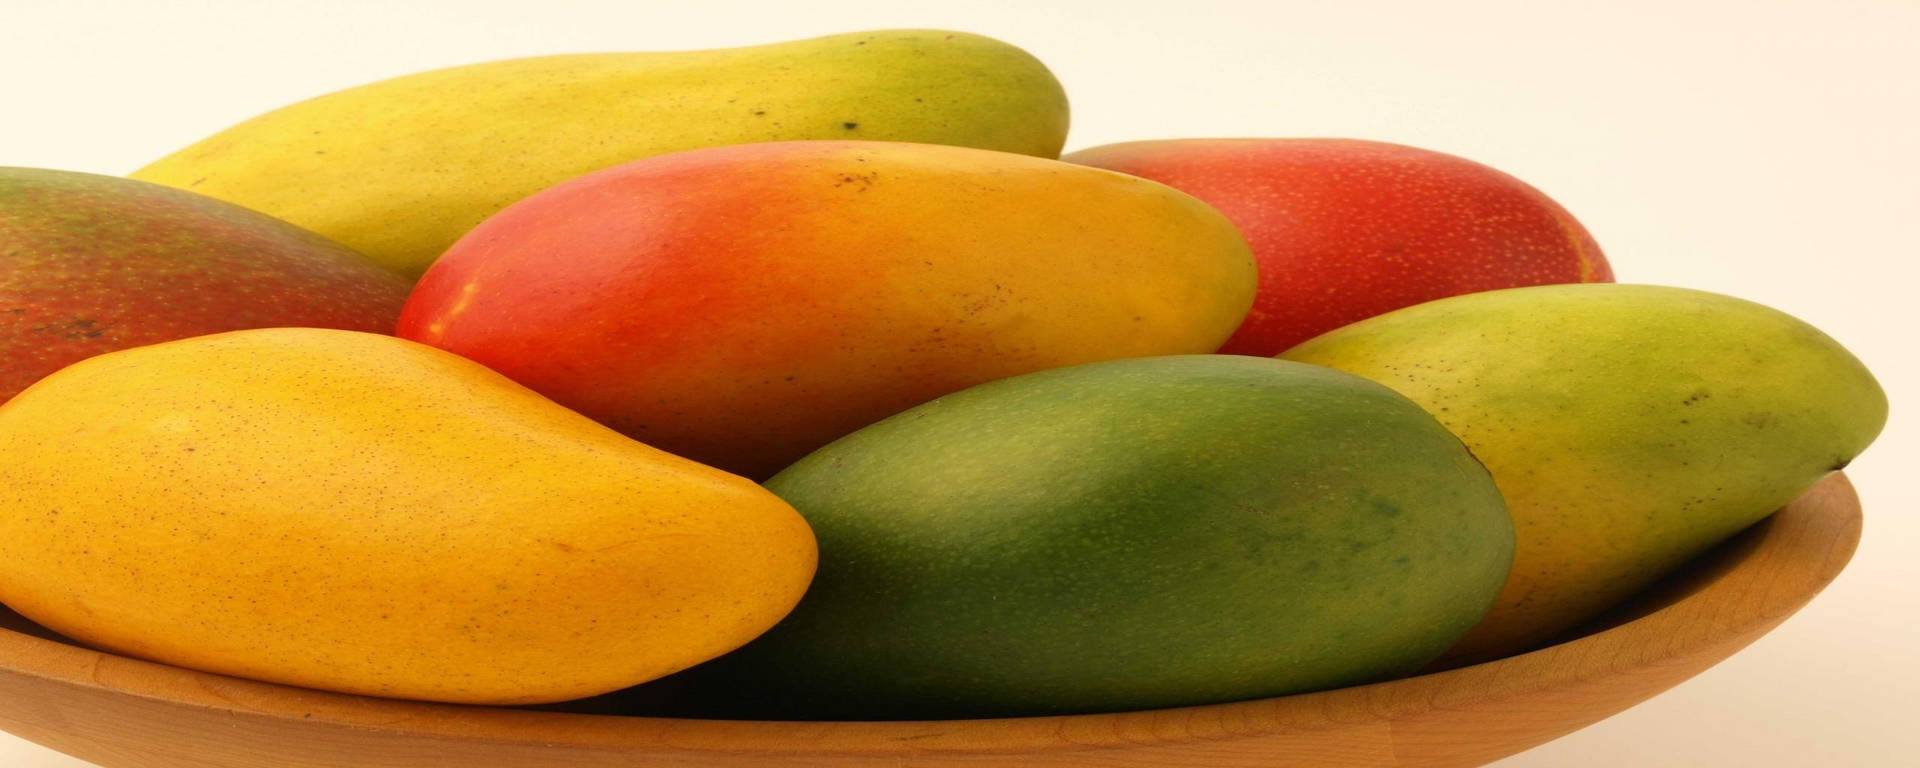 Different Colors Of Mango Fruits Background